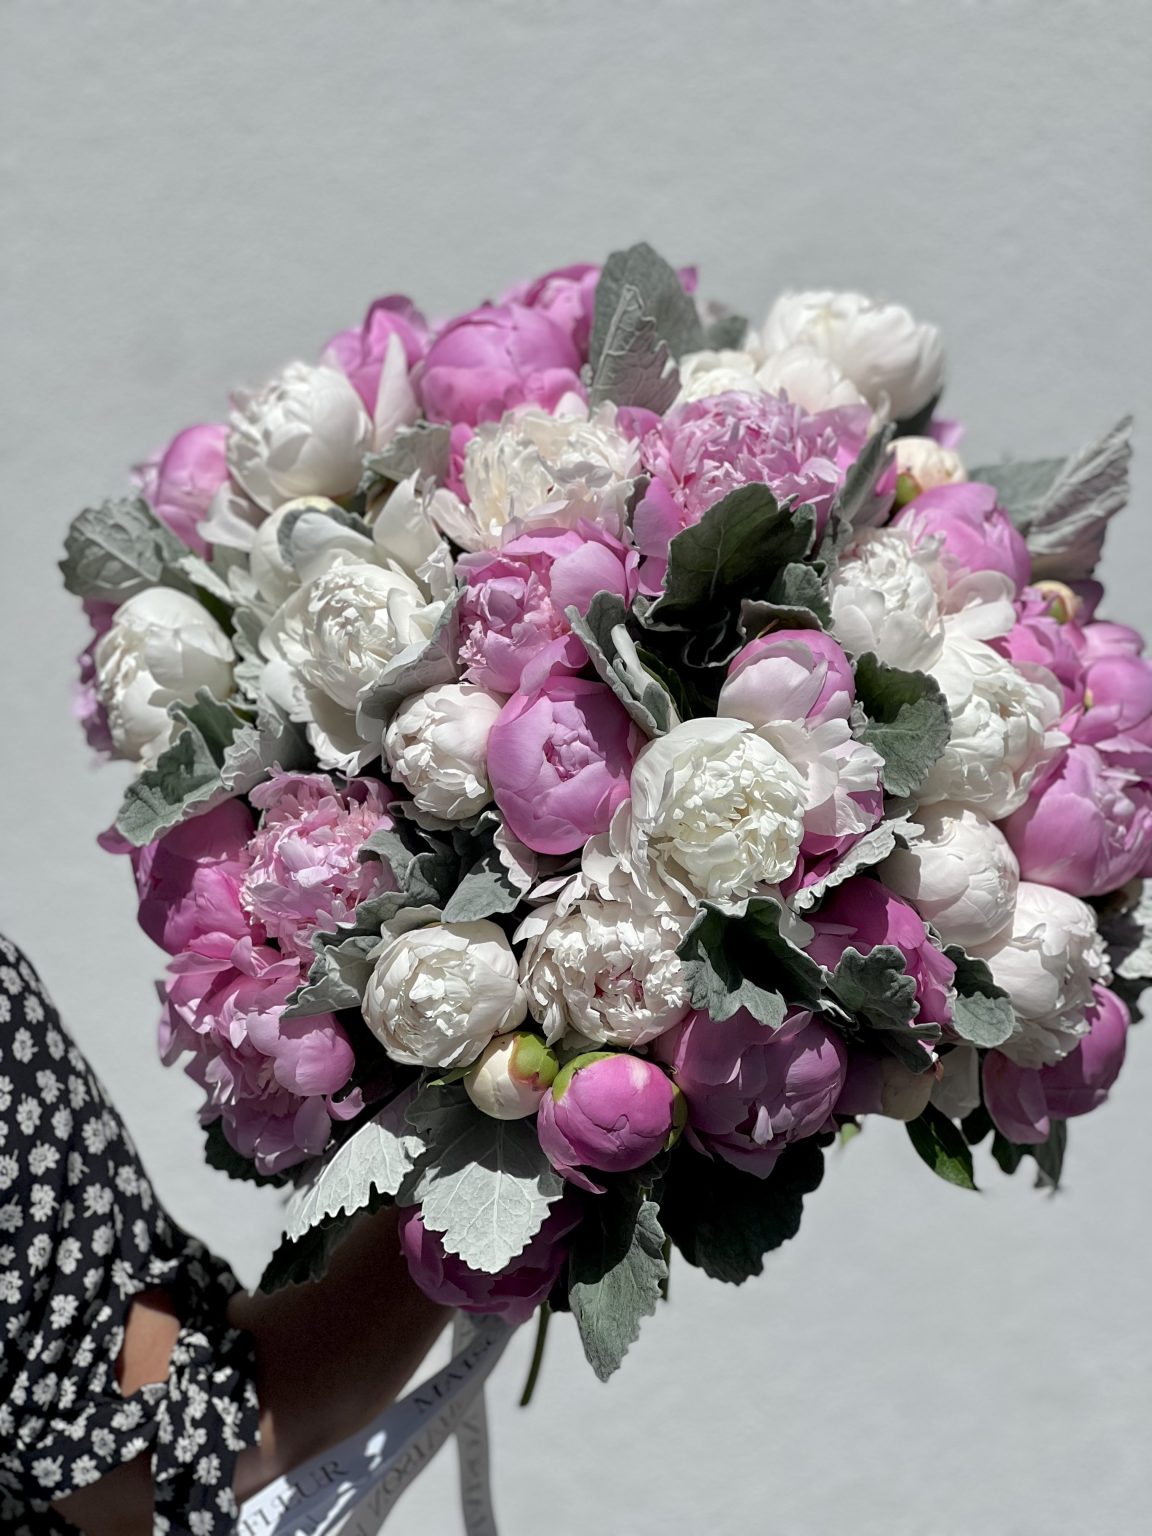 French Peonies and Dusty Miller, Obsession - 50 premium French peonies and dusty miller